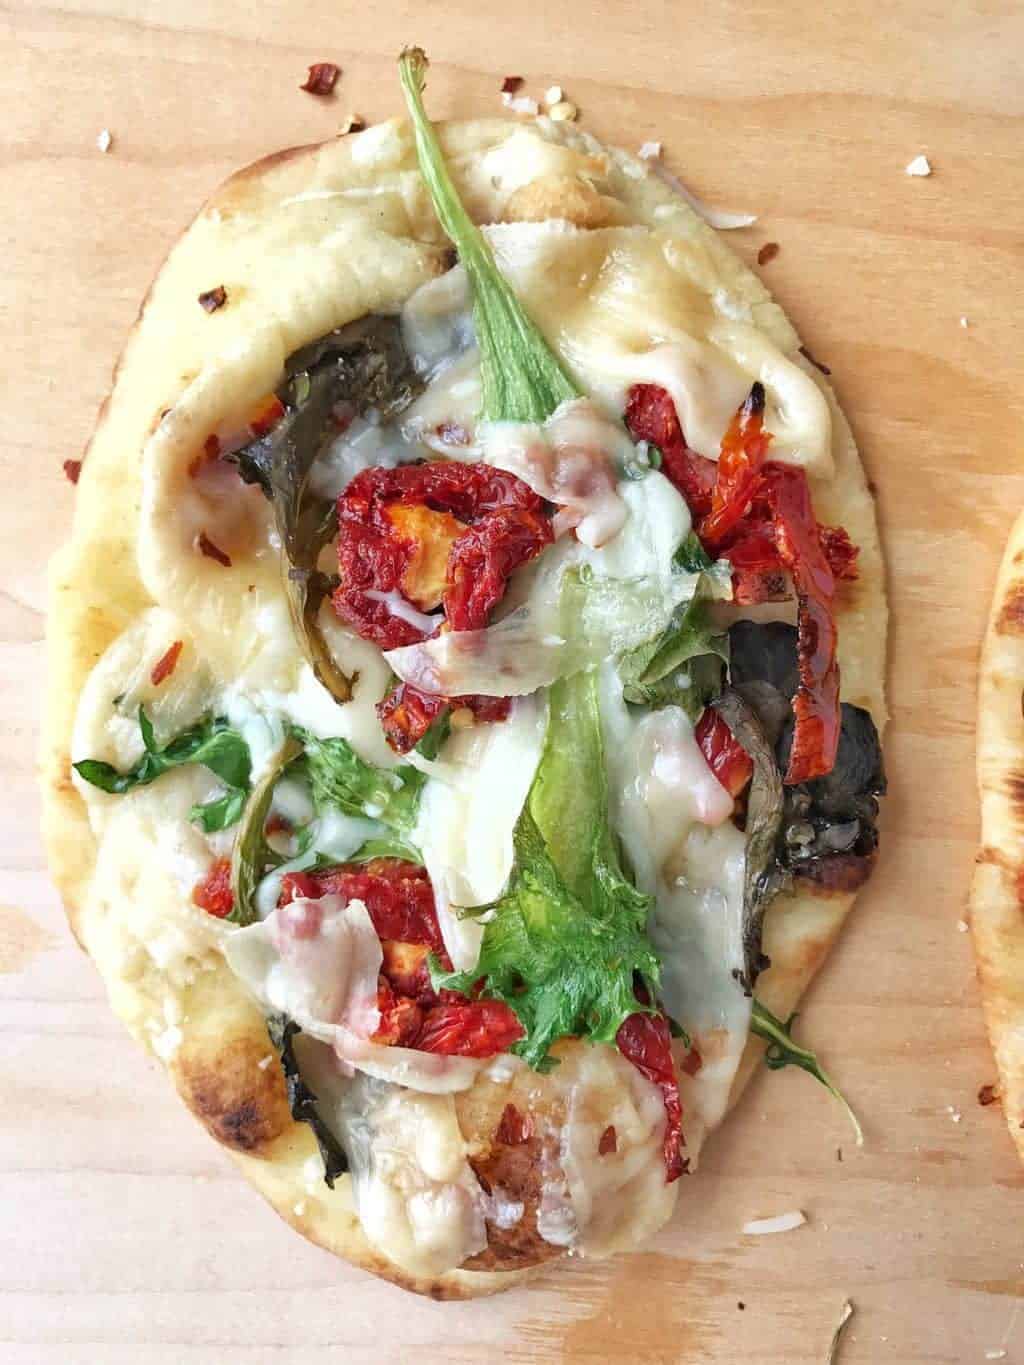 a naan pizza shown up close with parmesan cheese, garlic, leafy greens and sun dried tomatoes.